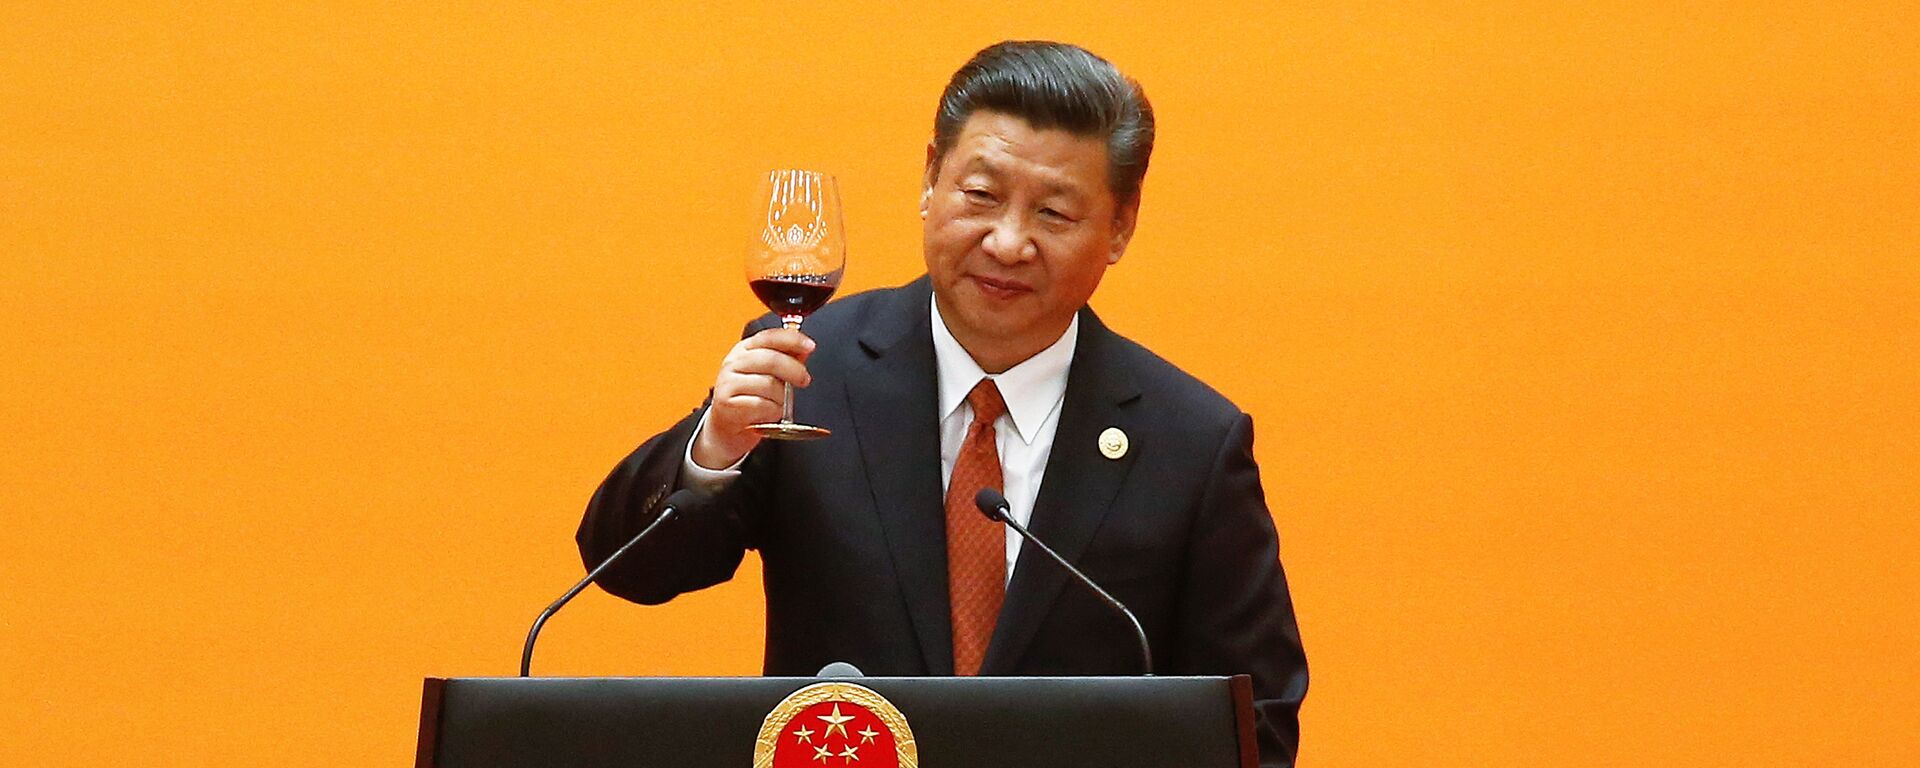 Chinese President Xi Jinping makes a toast at the beginning of the welcoming banquet at the Great Hall of the People during the first day of the Belt and Road Forum in Beijing, China, May 14, 2017 - Sputnik International, 1920, 05.01.2021